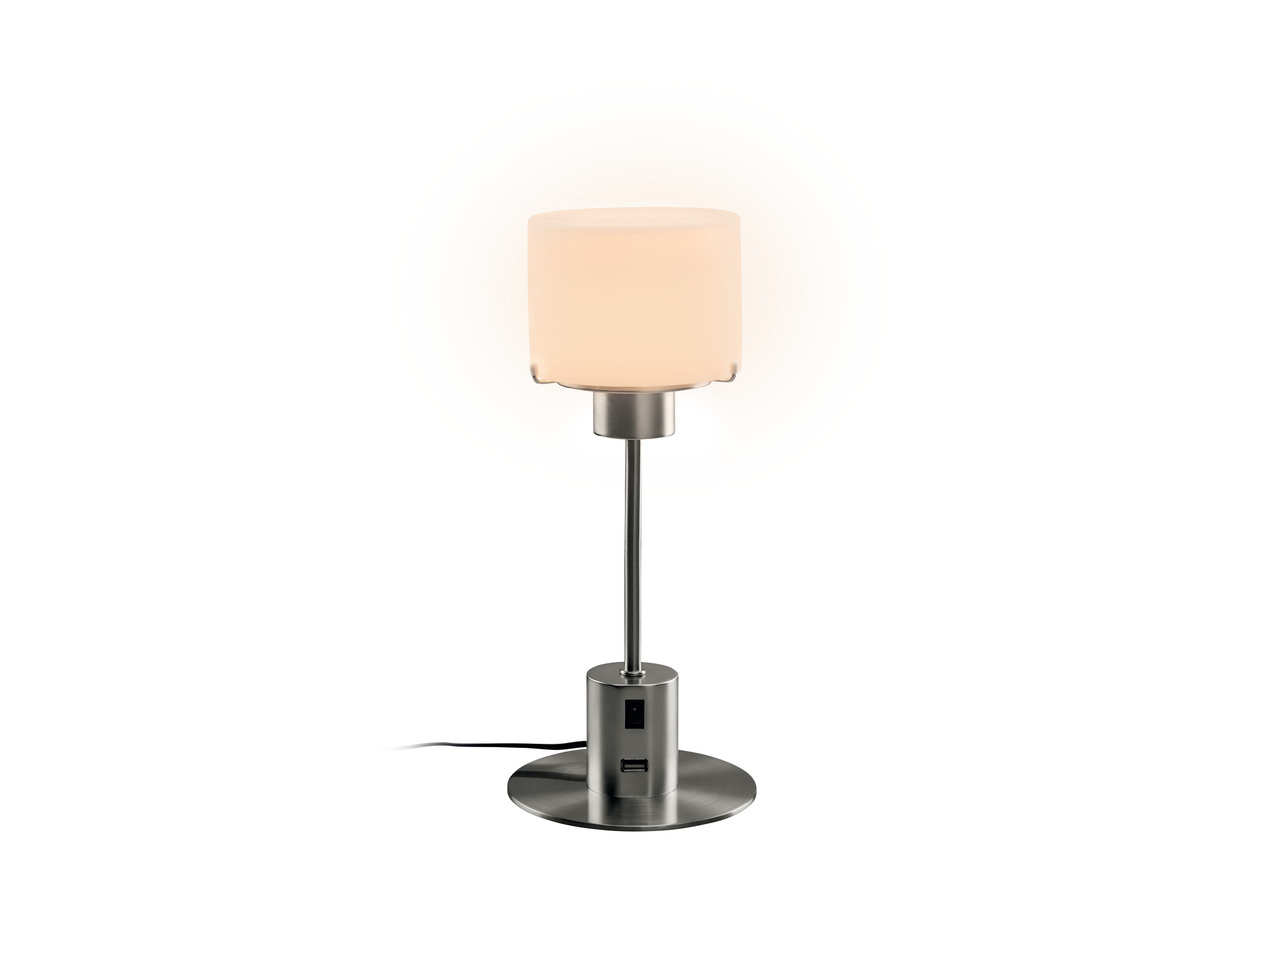 LIVARNO LUX LED Table Lamp with USB